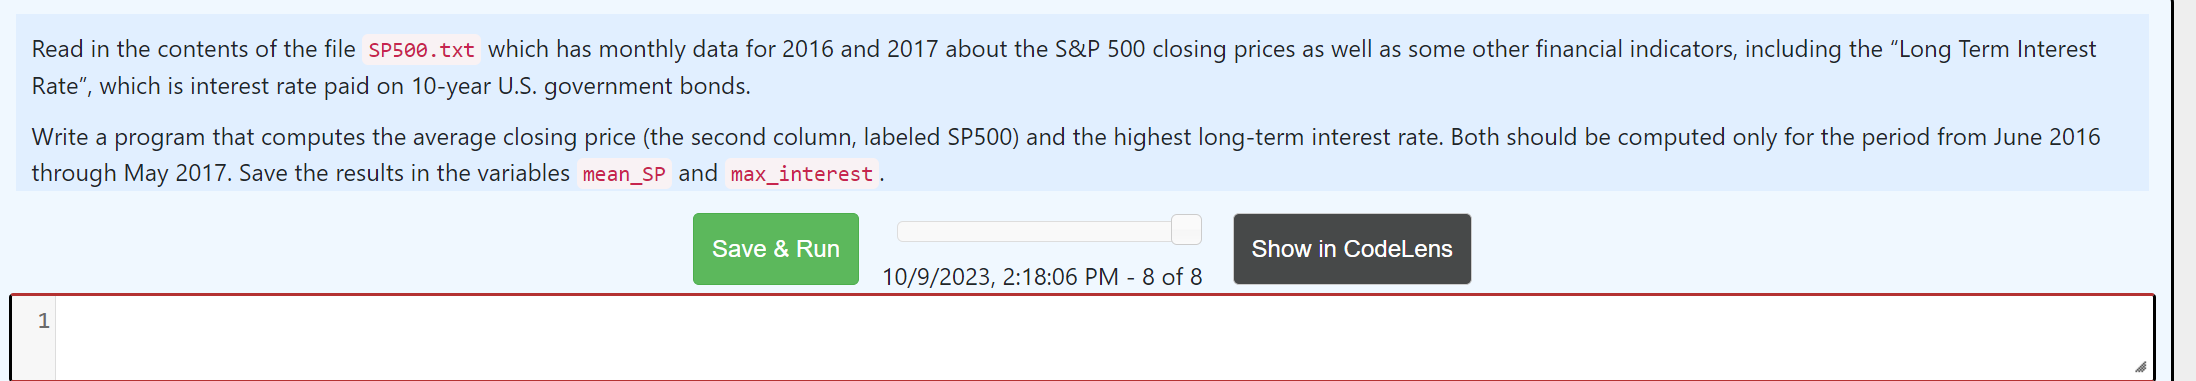 Read in the contents of the file SP500.txt which has monthly data for 2016 and 2017 about the S&P 500 closing